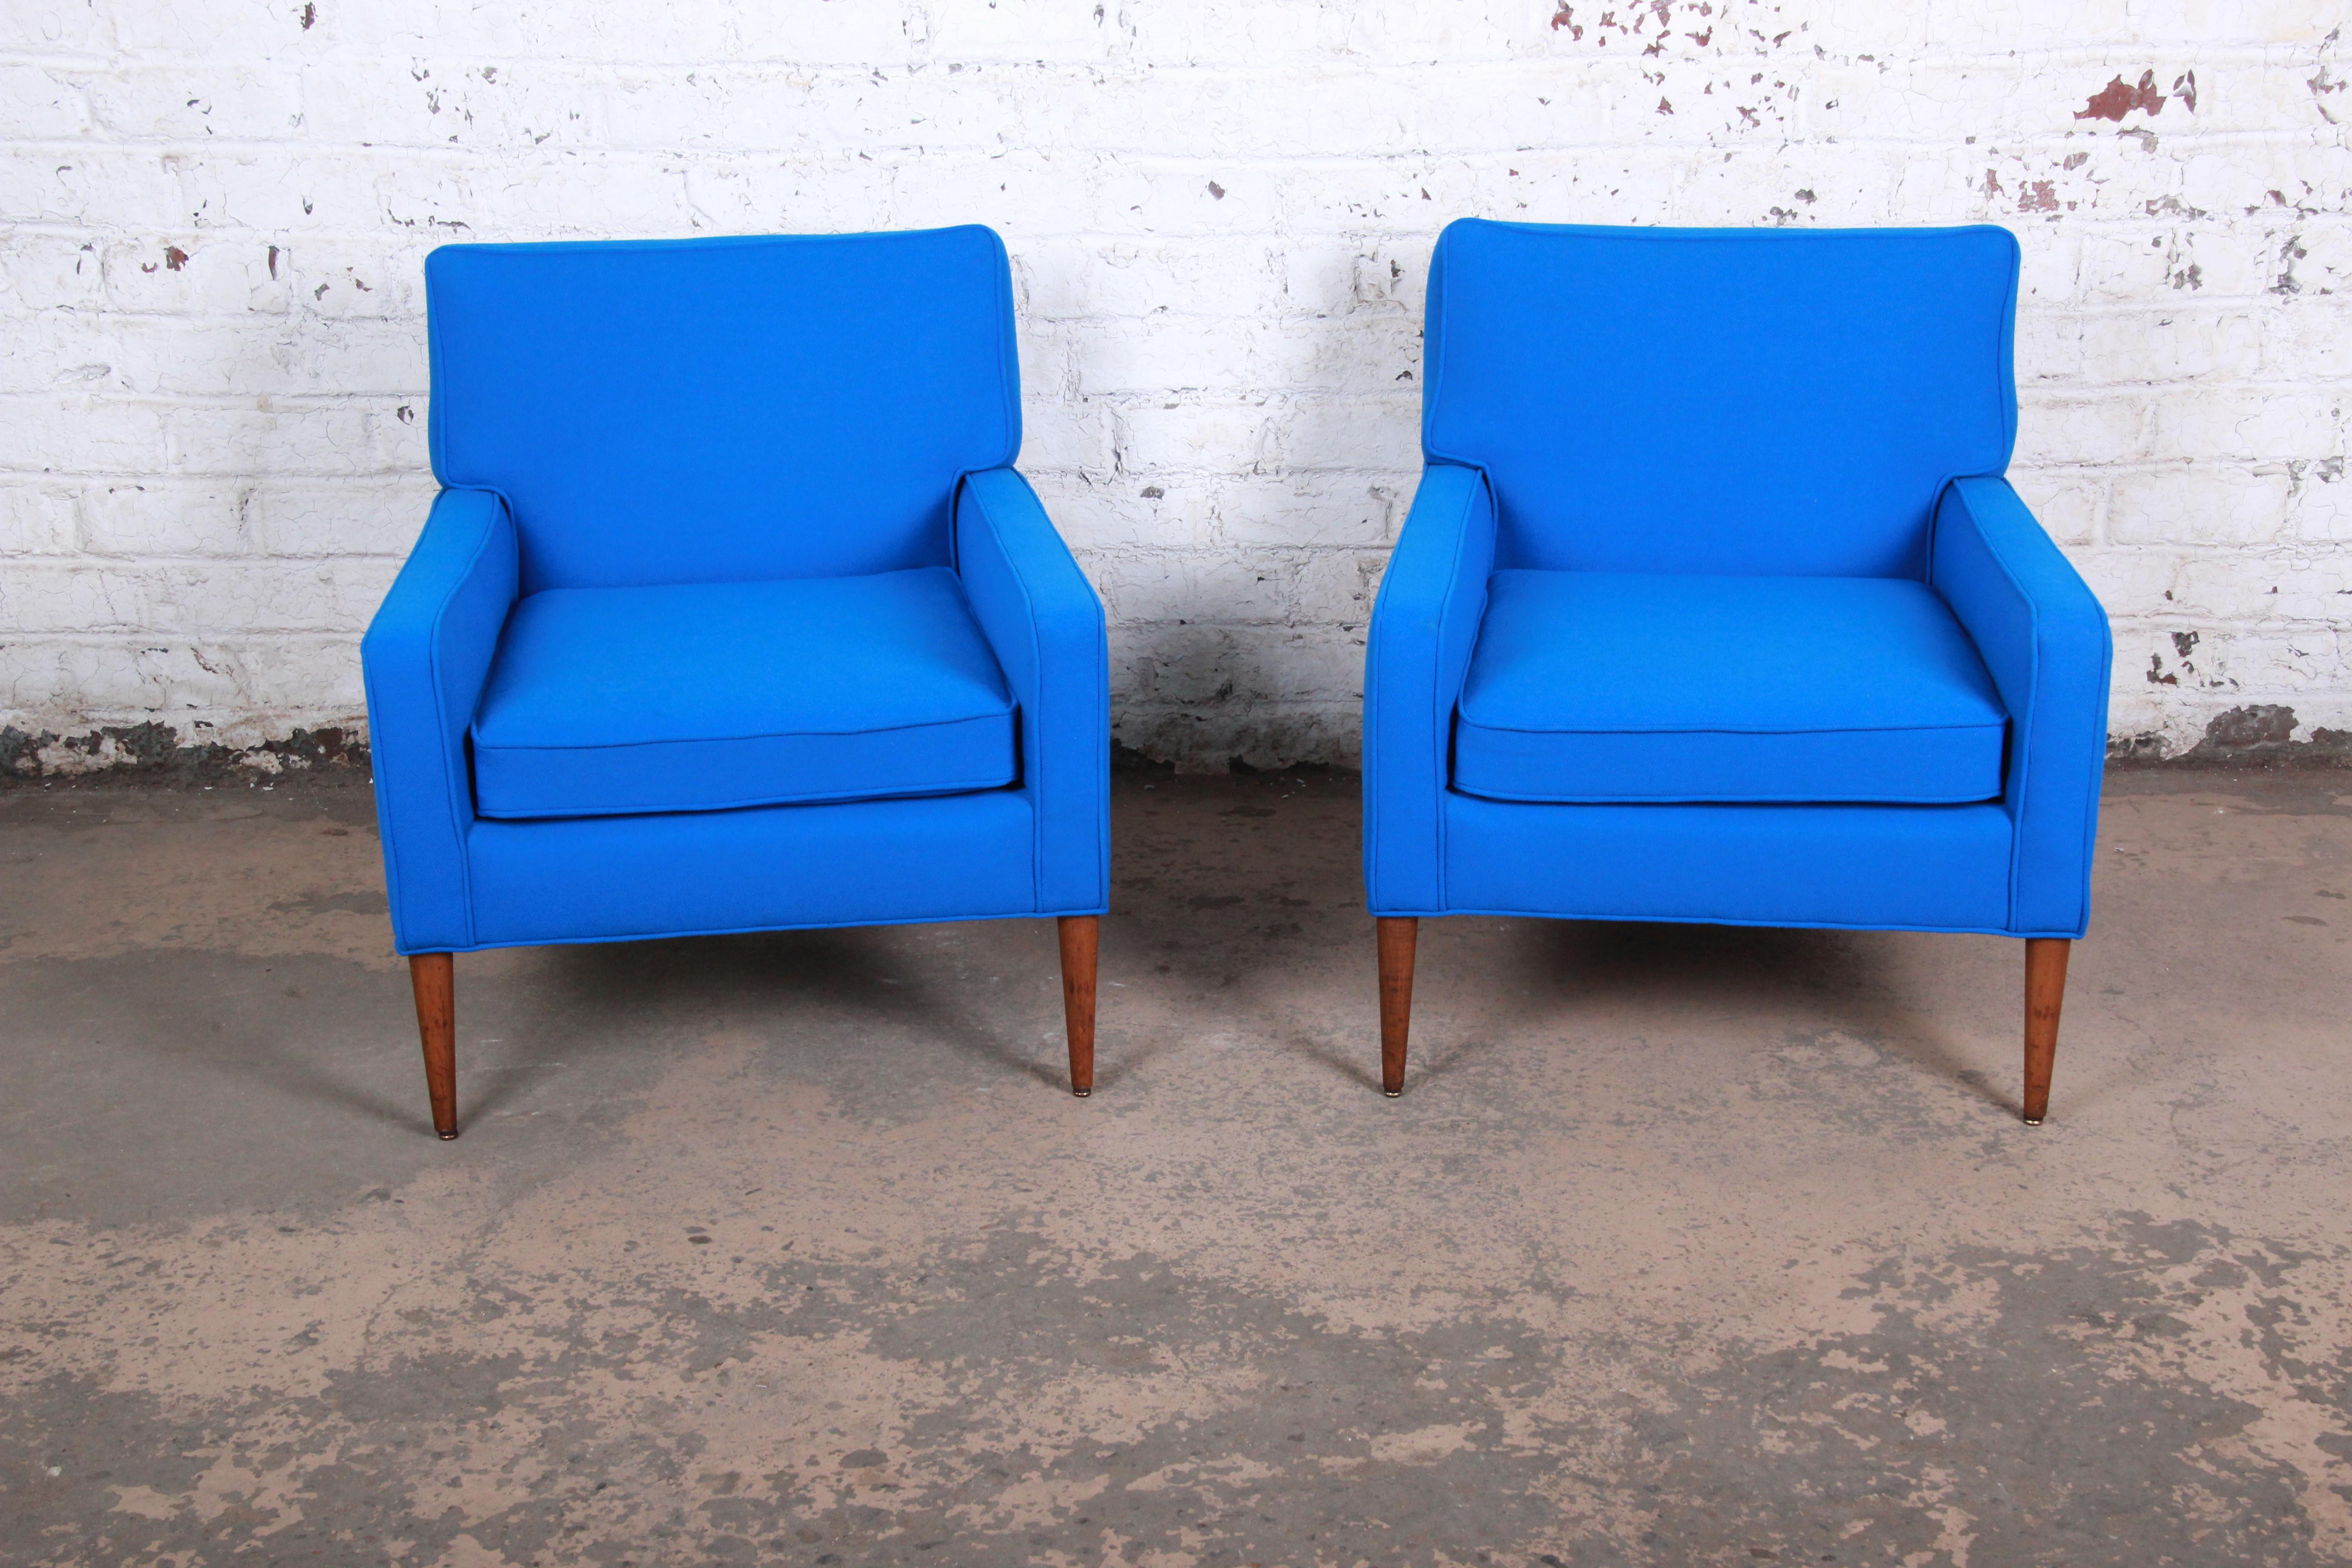 Mid-20th Century Paul McCobb for Directional Model 3022 Lounge Chairs, Newly Reupholstered